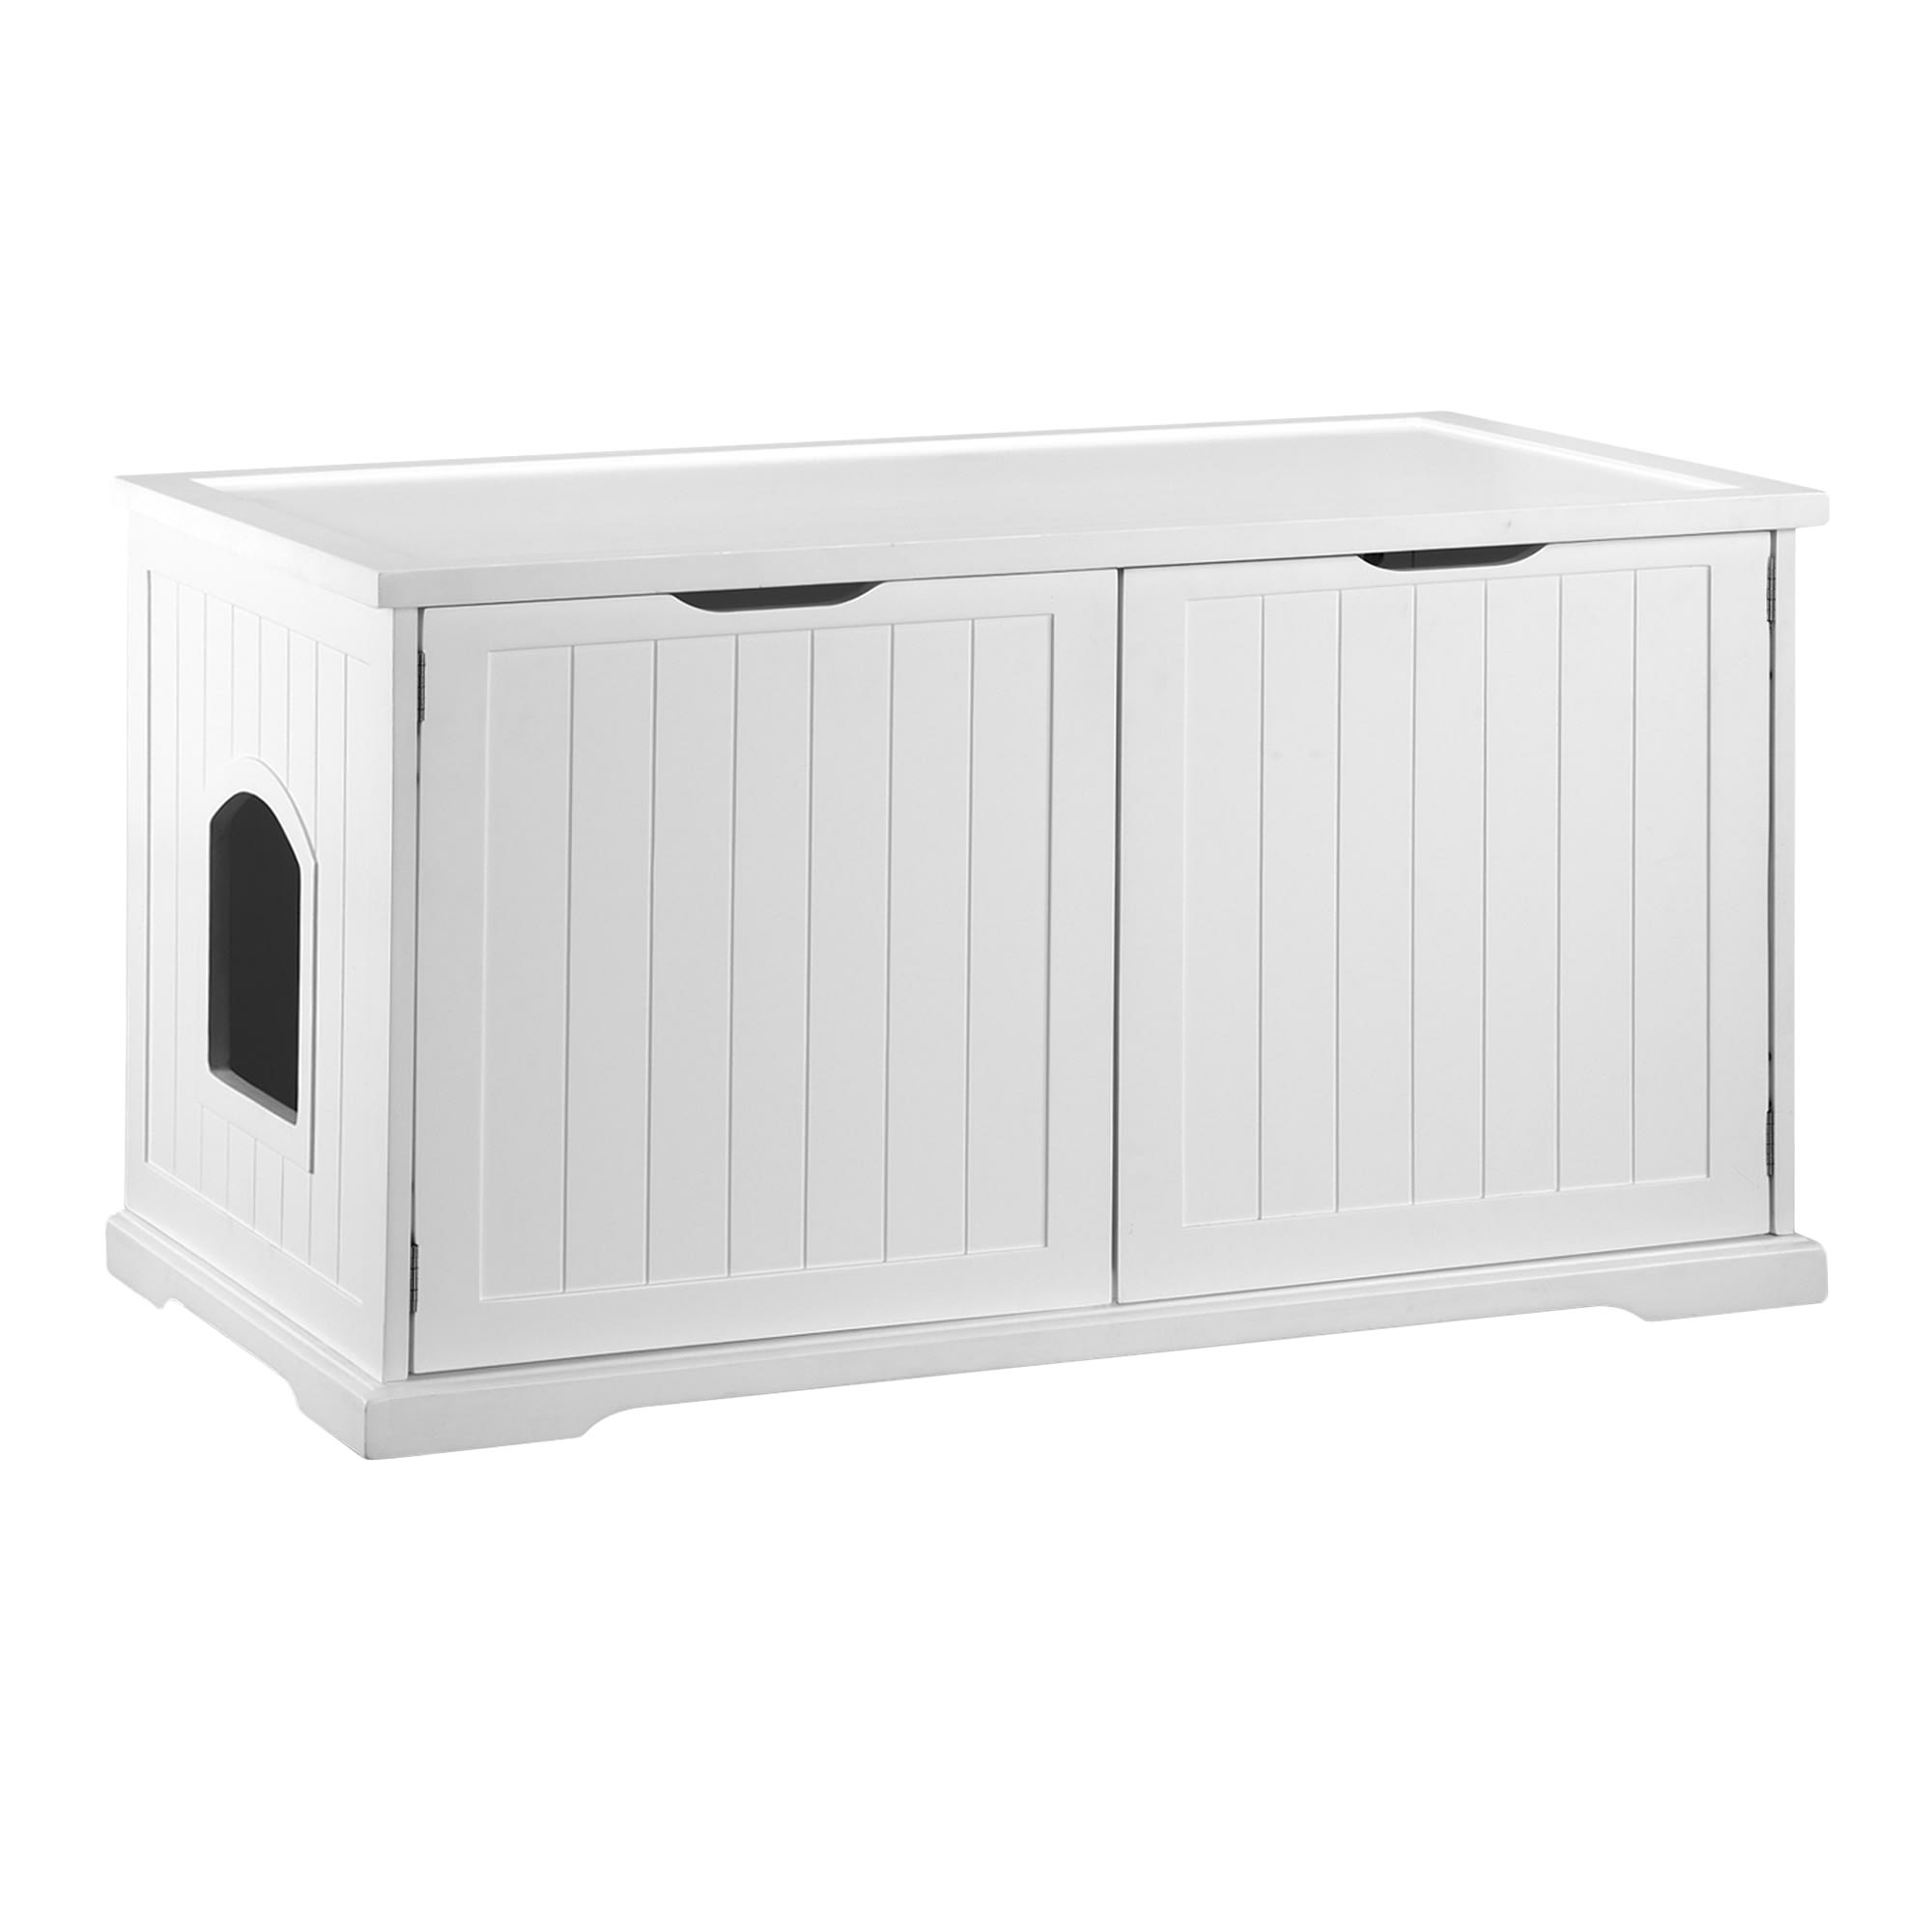 Zoovilla Large White Cat Washroom Bench Litter Box Cover